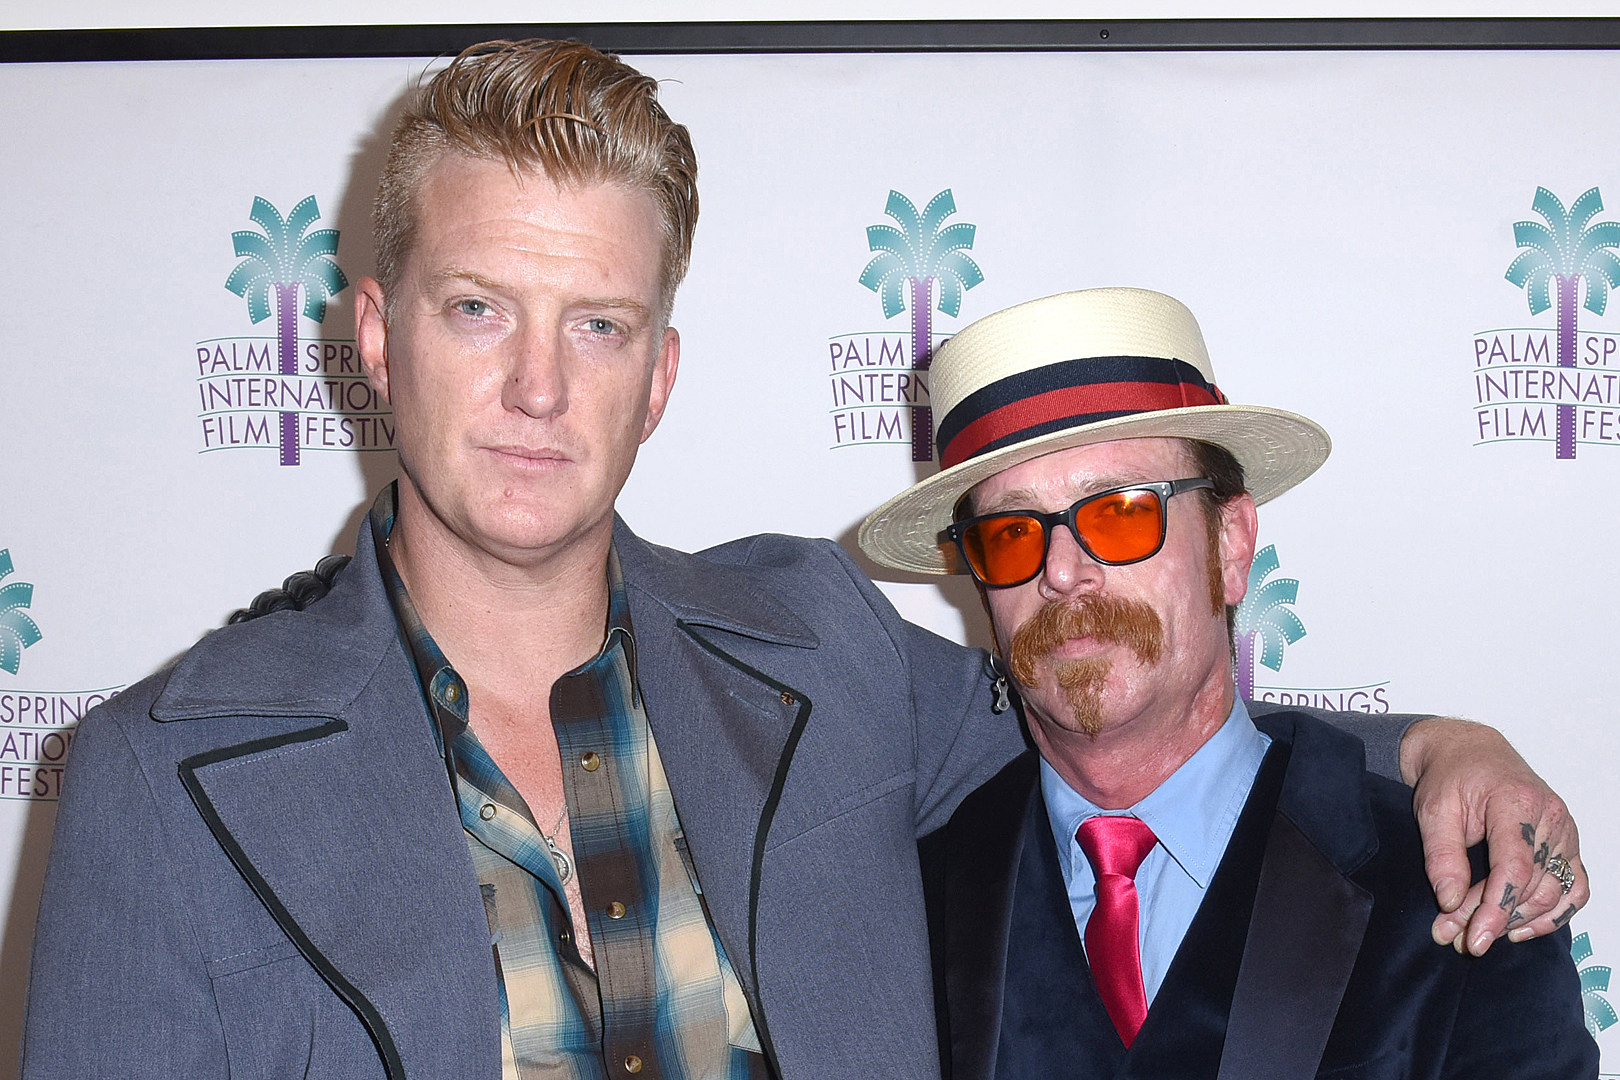 Queens of the Stone Age, Eagles of Death Metal Members + More Dress Up for Halloween